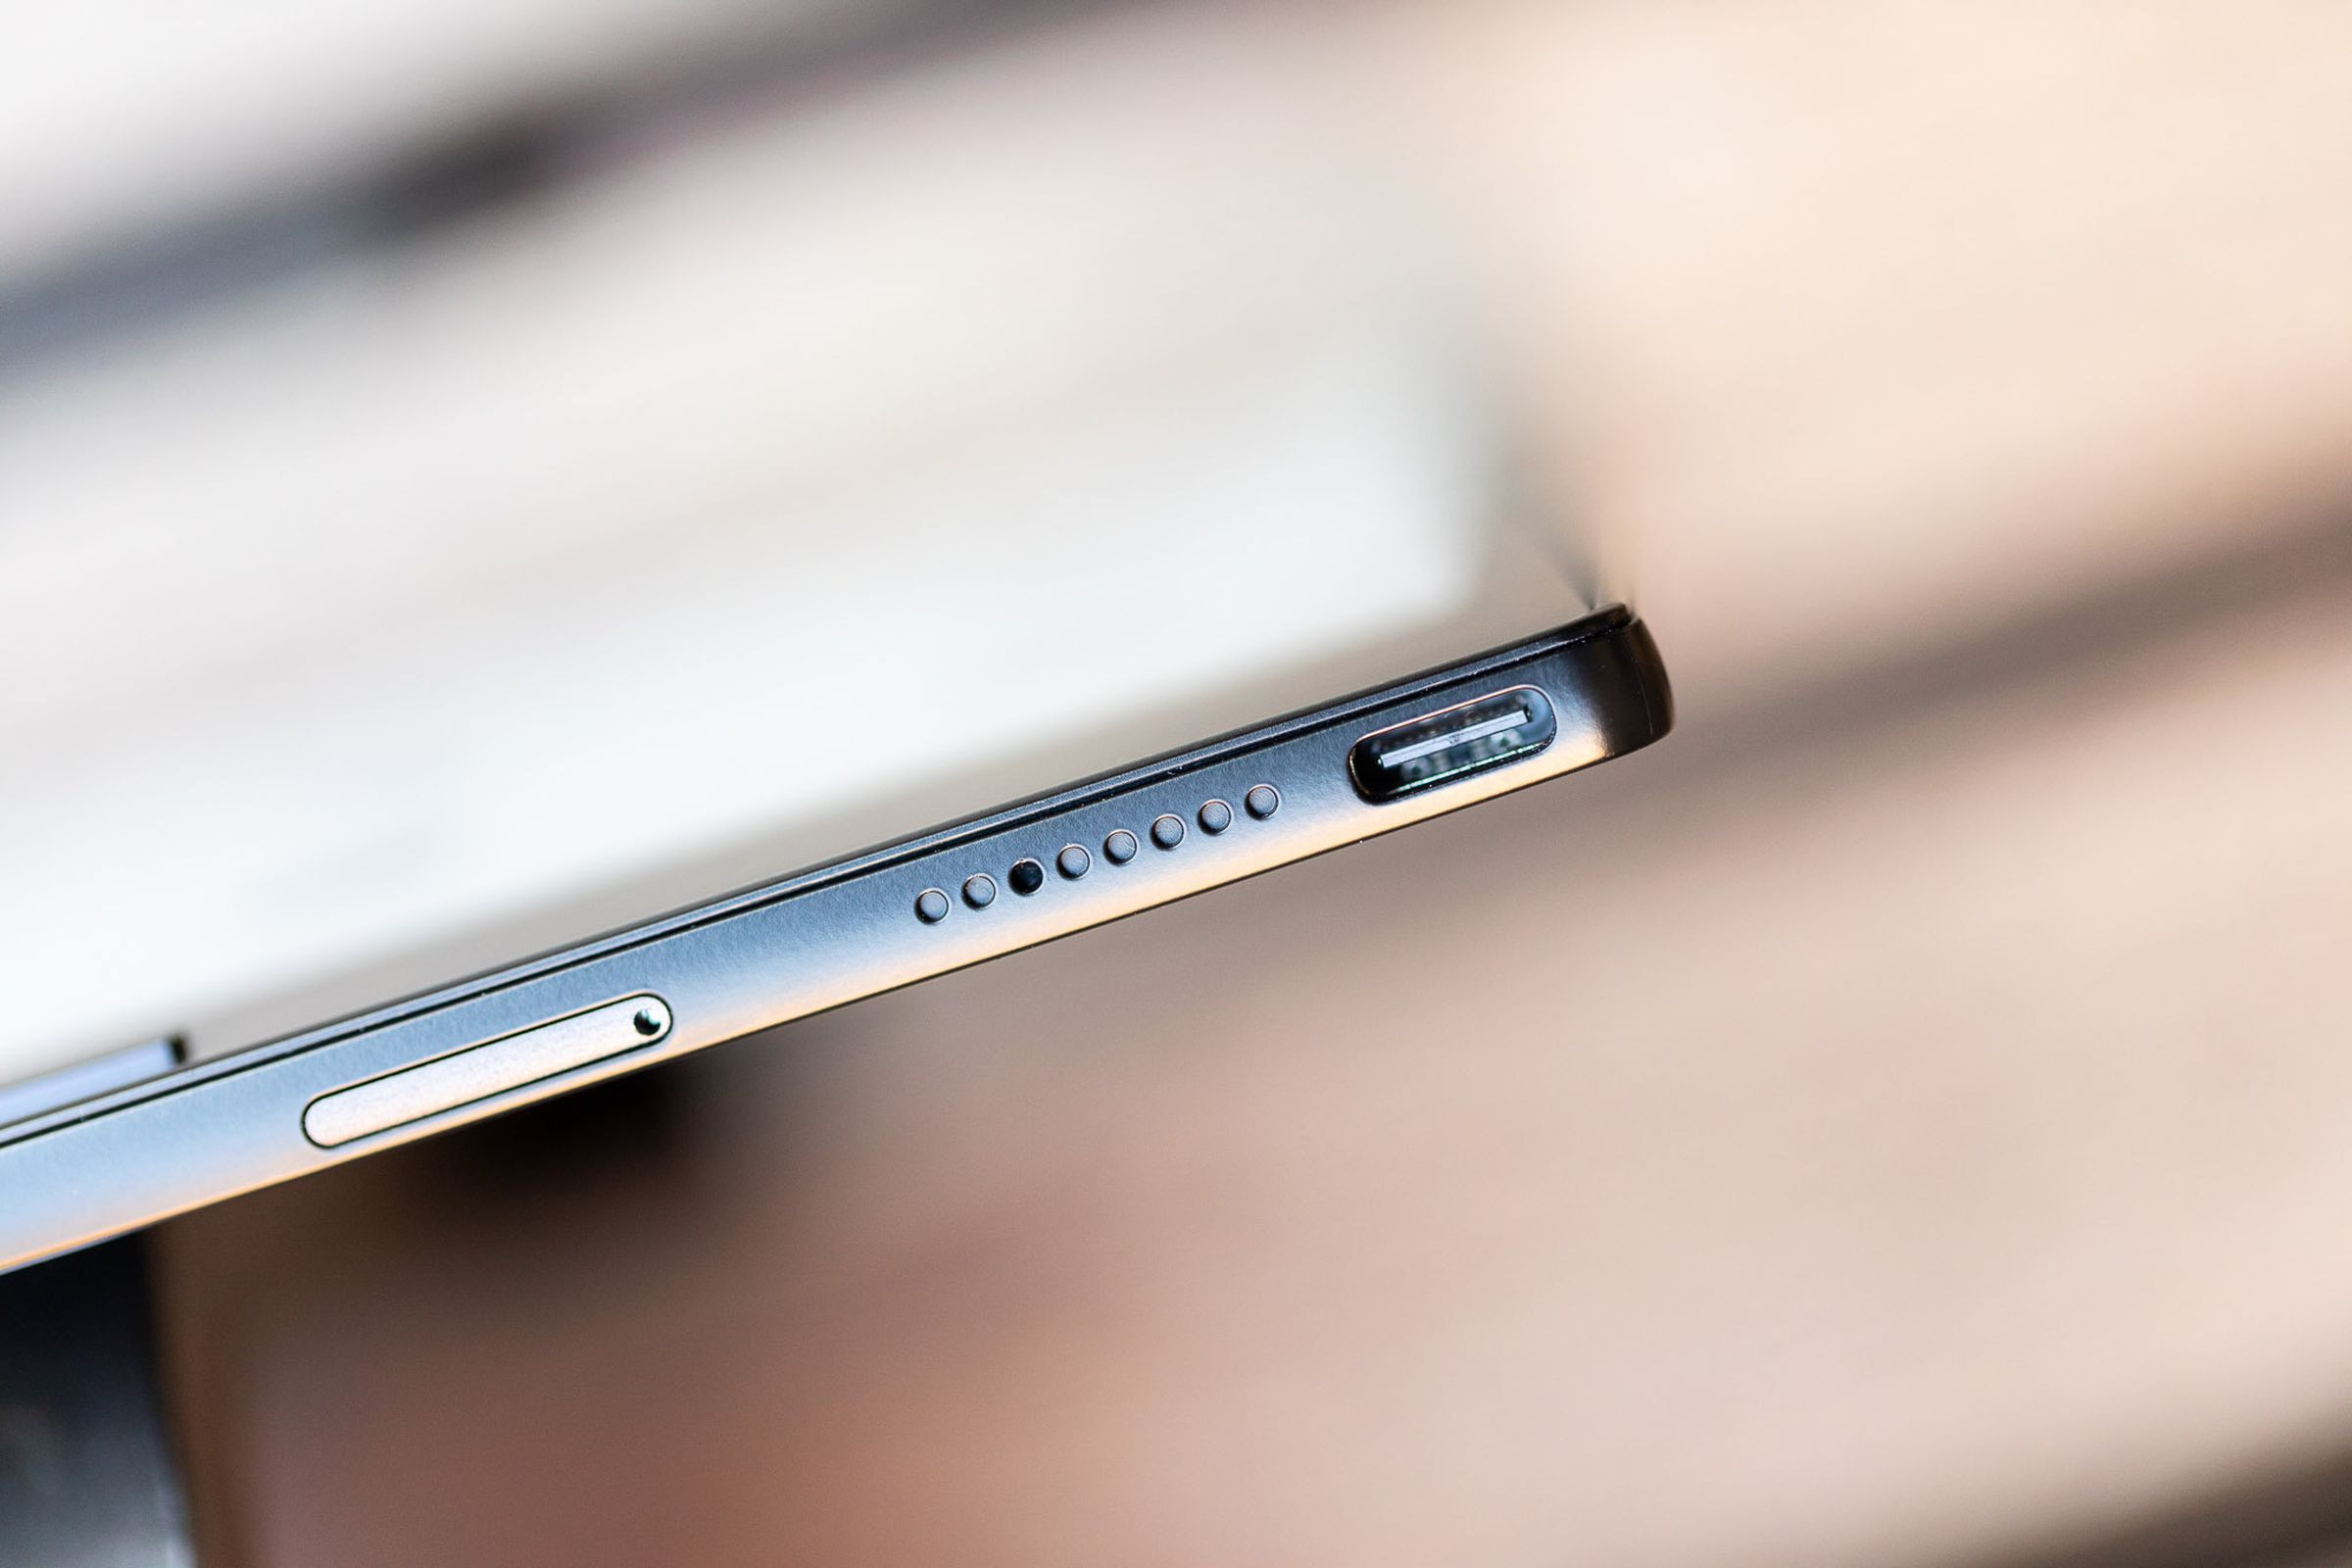 A close-up view of a microSD card slot, a speaker, and a USB-C port.